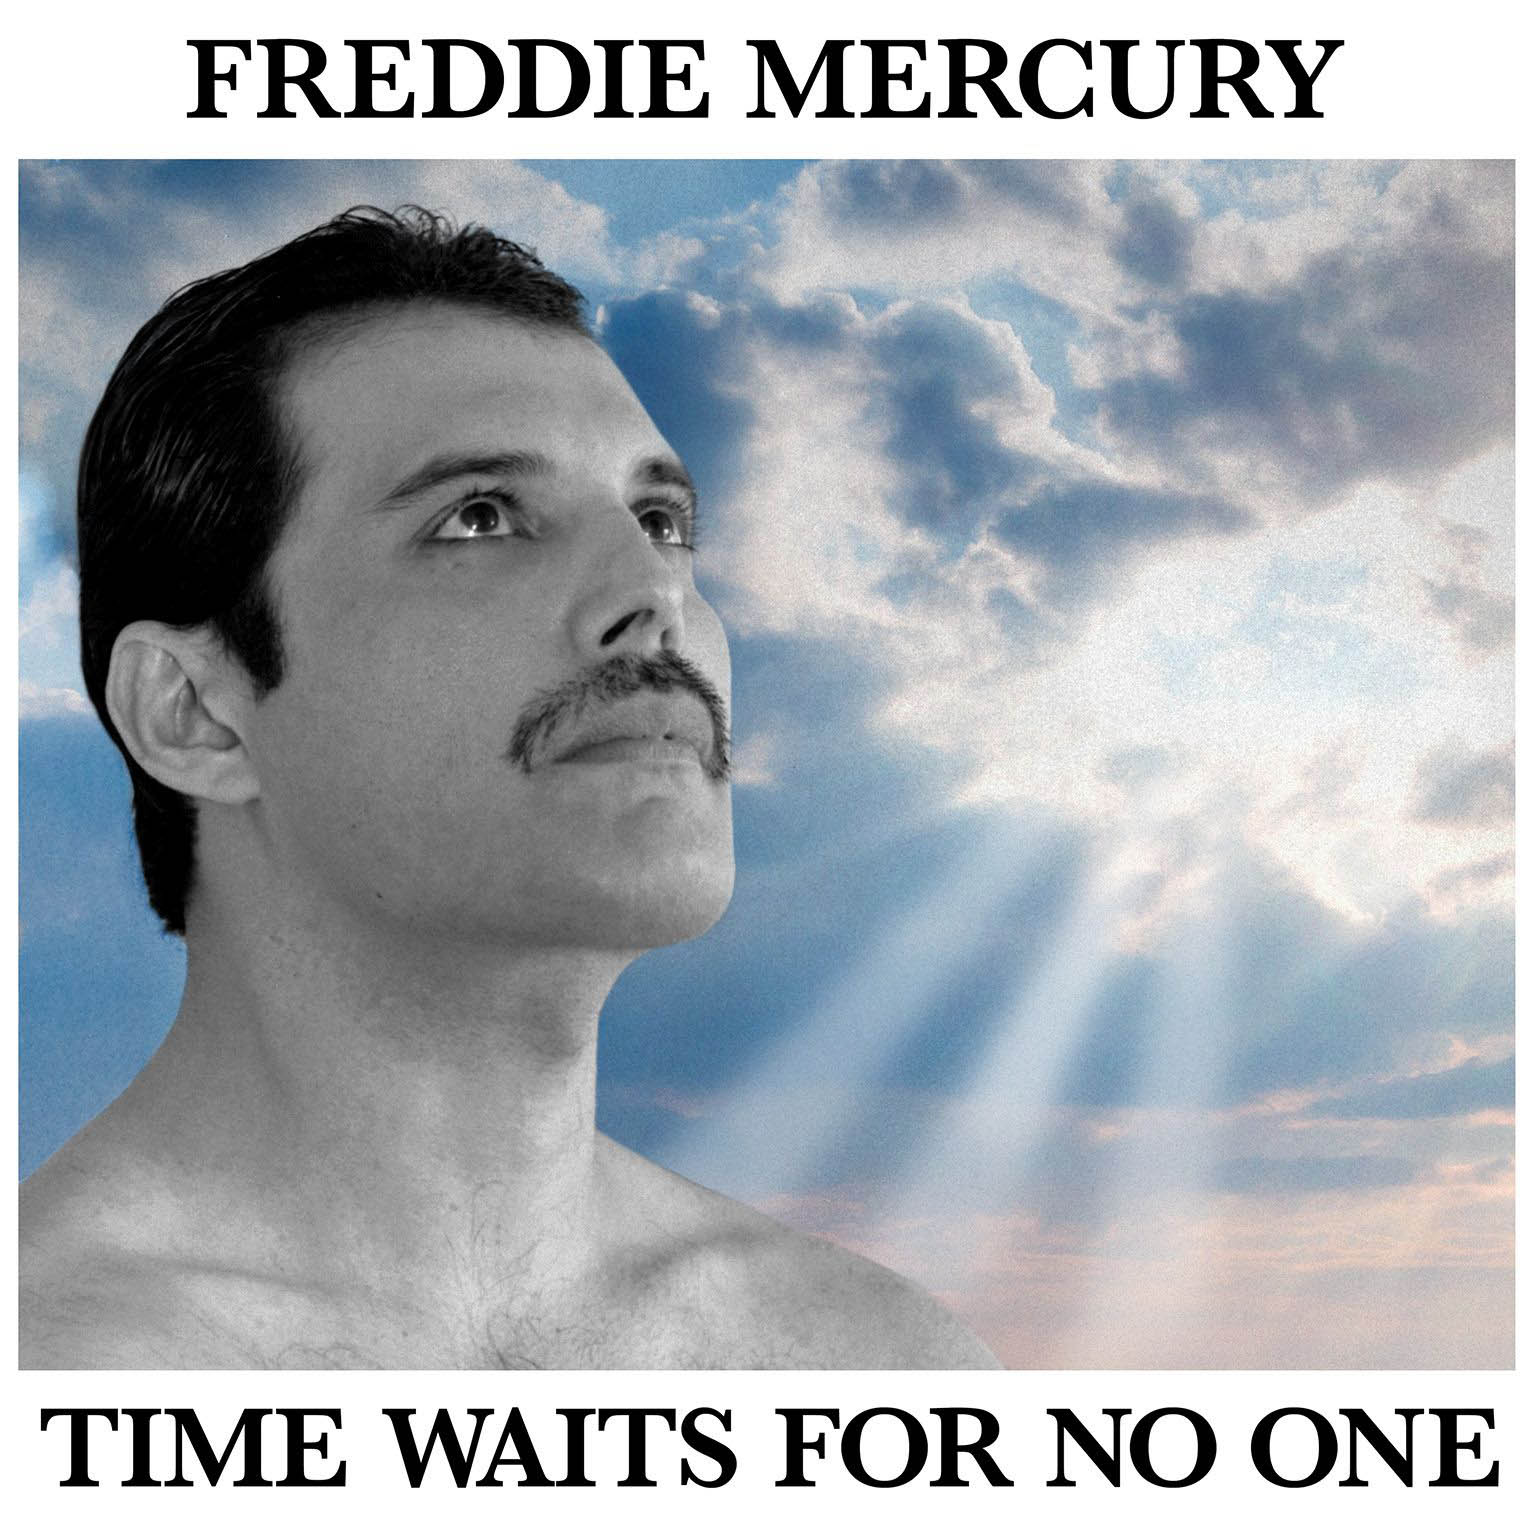 Freddie Mercury - Time Waits For No One - Cover Art